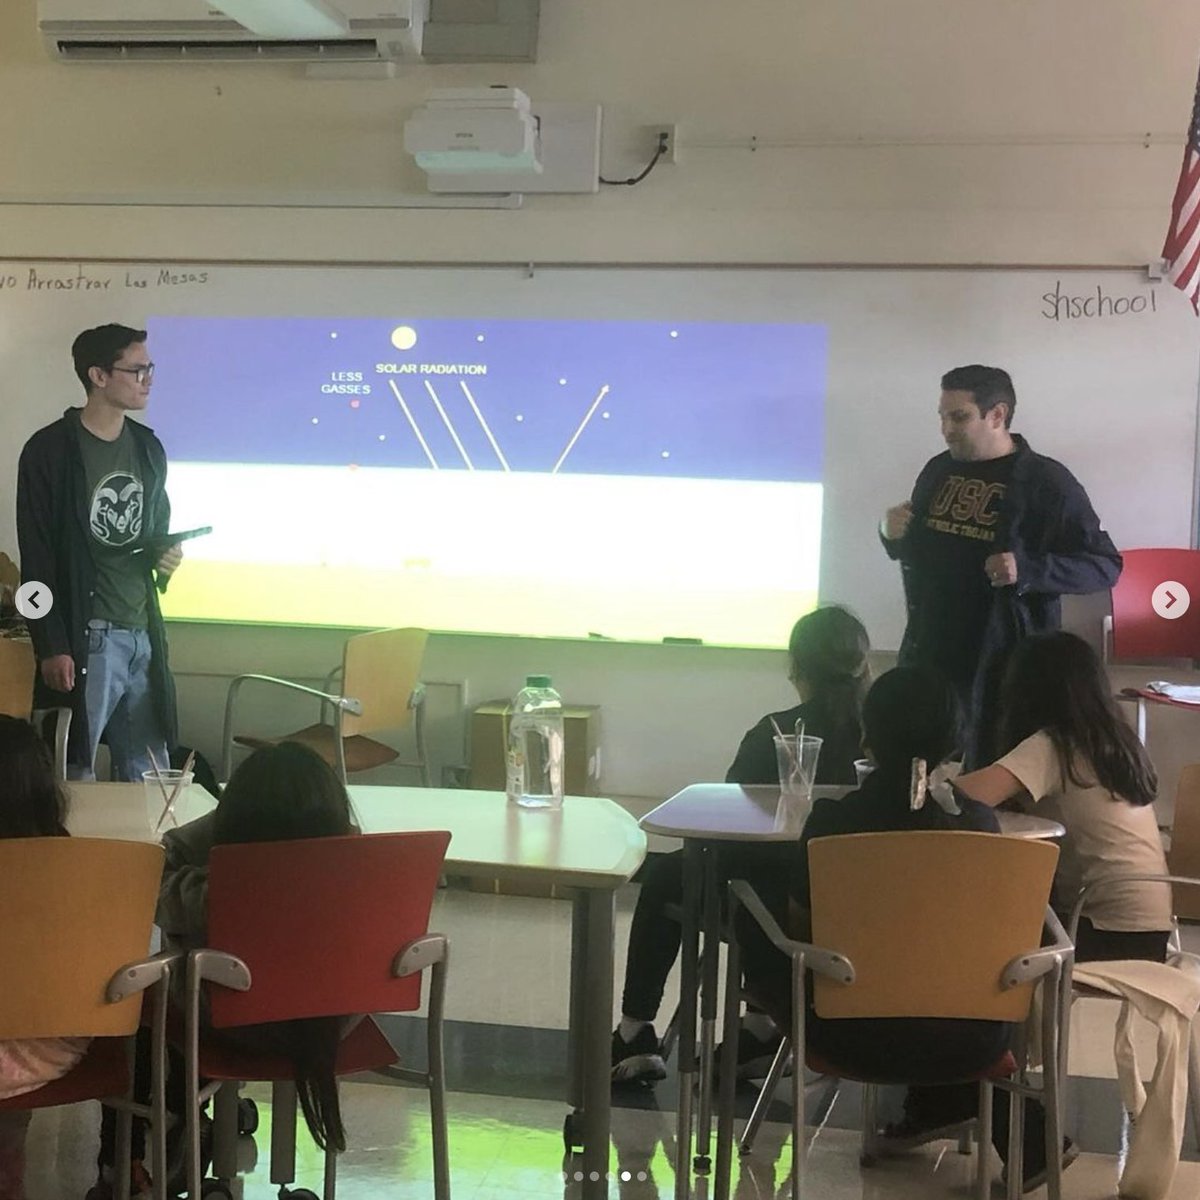 Last week SACNAS members David Velazquez, Liz Contreras, and Jeremiah Choate preformed an exciting water electrolysis experiment at @sacredheartschoolla to teach the students about energy, renewable energy, and pH! #stemoutreach #outreach #diversifystem